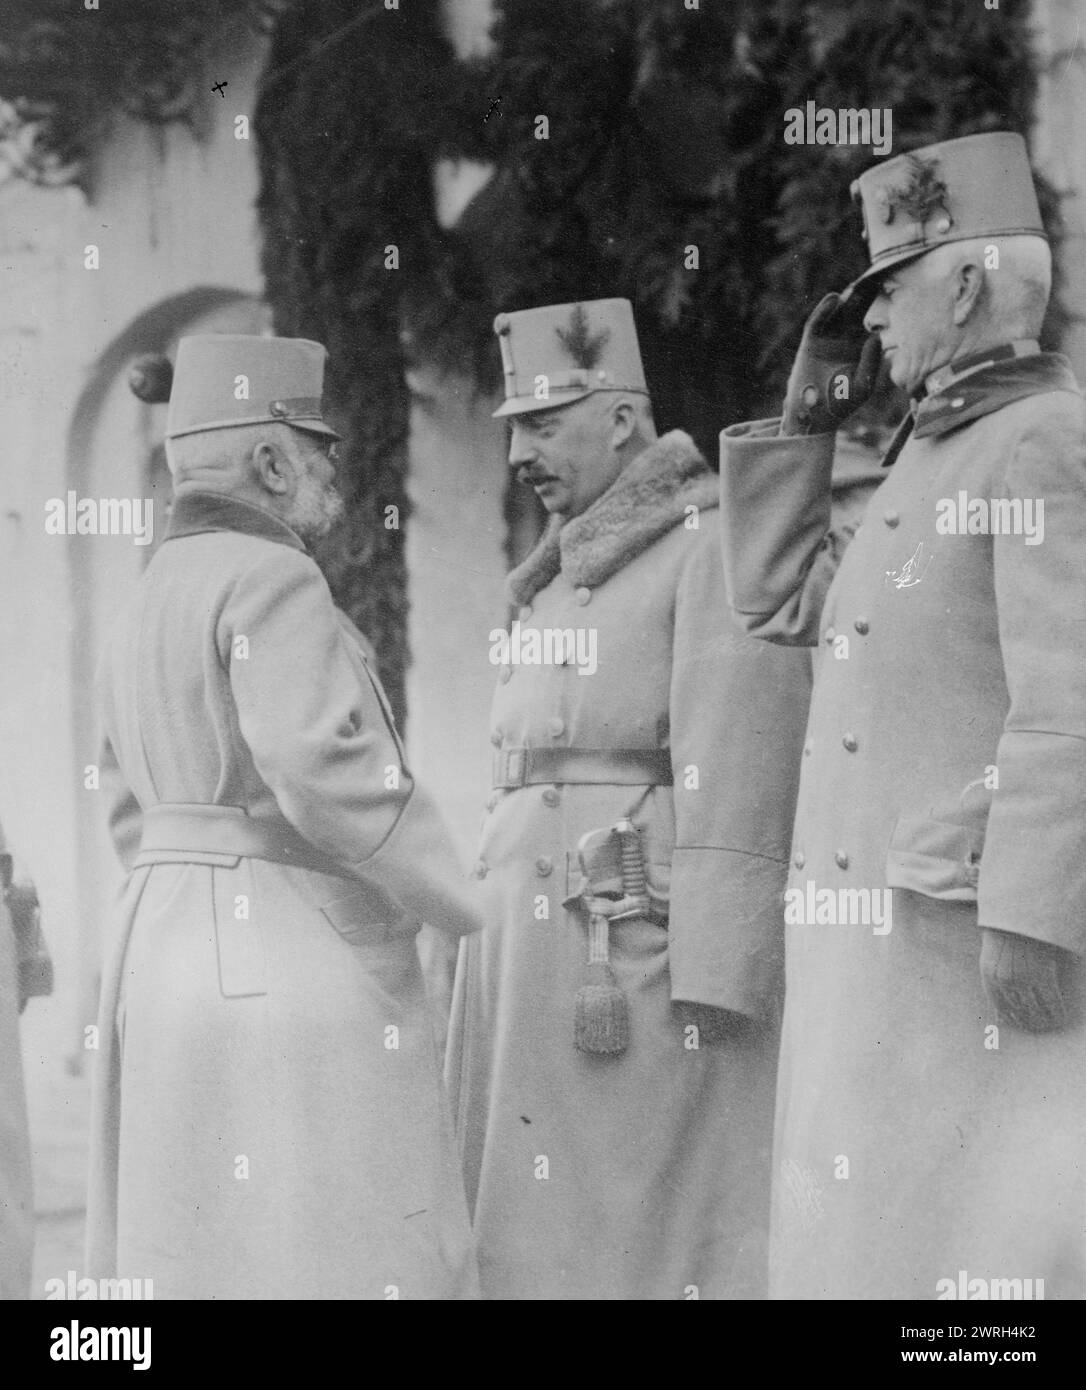 (l to r) Archdukes Friedrich and Peter Ferdinand, between 1914 and c1915. Archduke Friedrich, Duke of Teschen (1856-1936) who served as Supreme Commander of the Austro-Hungarian Army during World War I, with Archduke Peter Ferdinand of Austria (1874-1948). Stock Photo